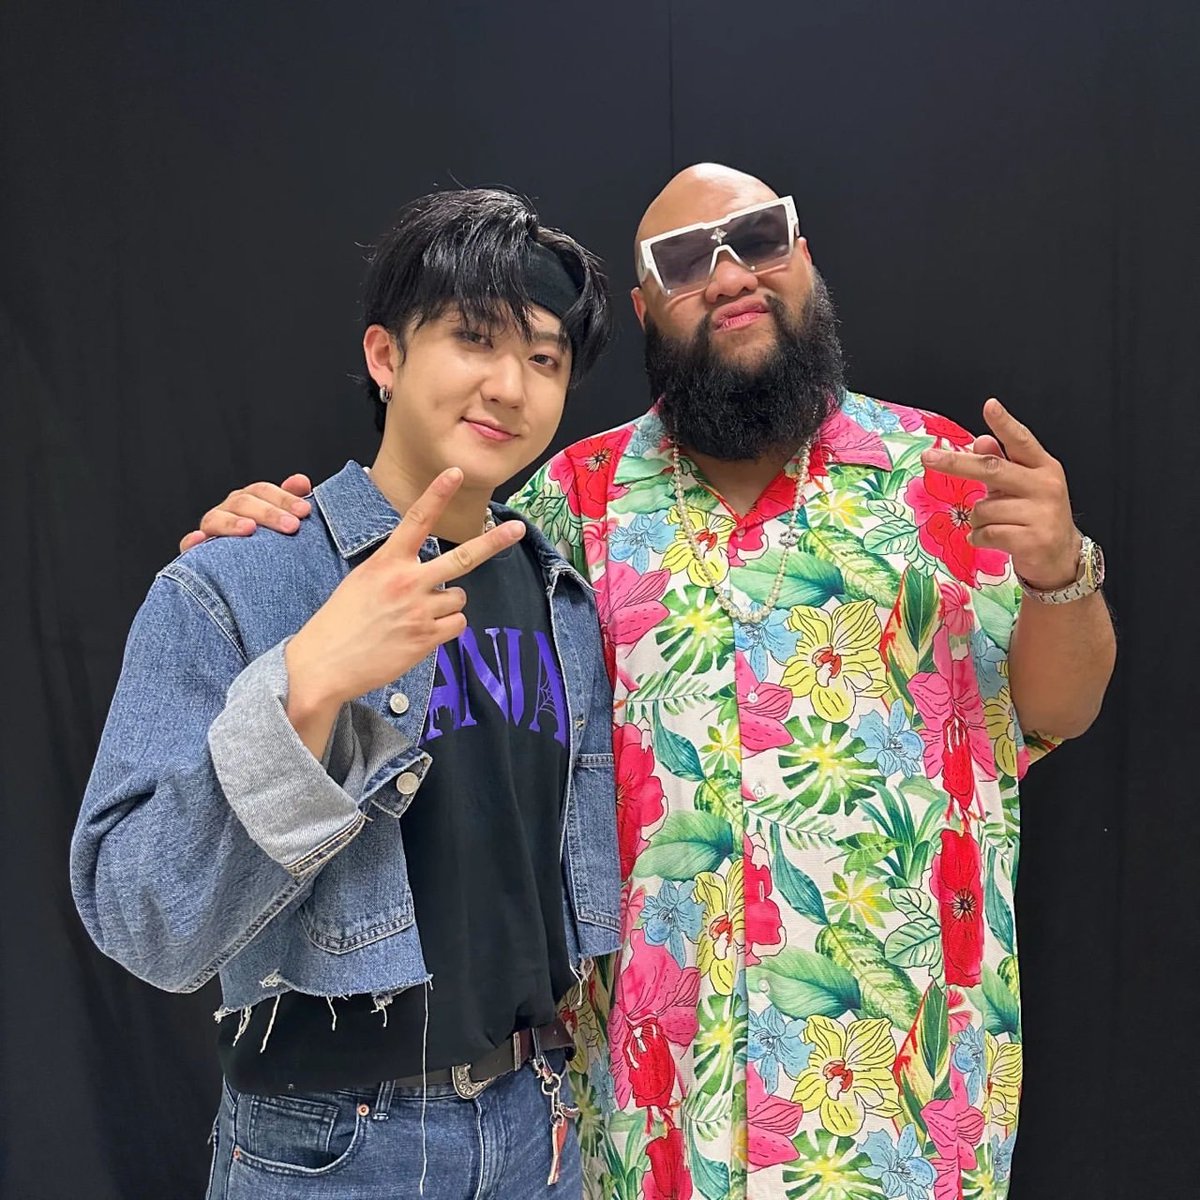 YES WE ARE ARE ARE ARE !!! Finally, We Met. BIG RESPECT Changbin @Stray_Kids . Thank you For Everything My Brother. Hope We Will Burn the Stage with @millimdk One Day . 💯💯💯💥💥💥🤜🤛🇰🇷🇹🇭 #2ndWorldTour_MANIACTH